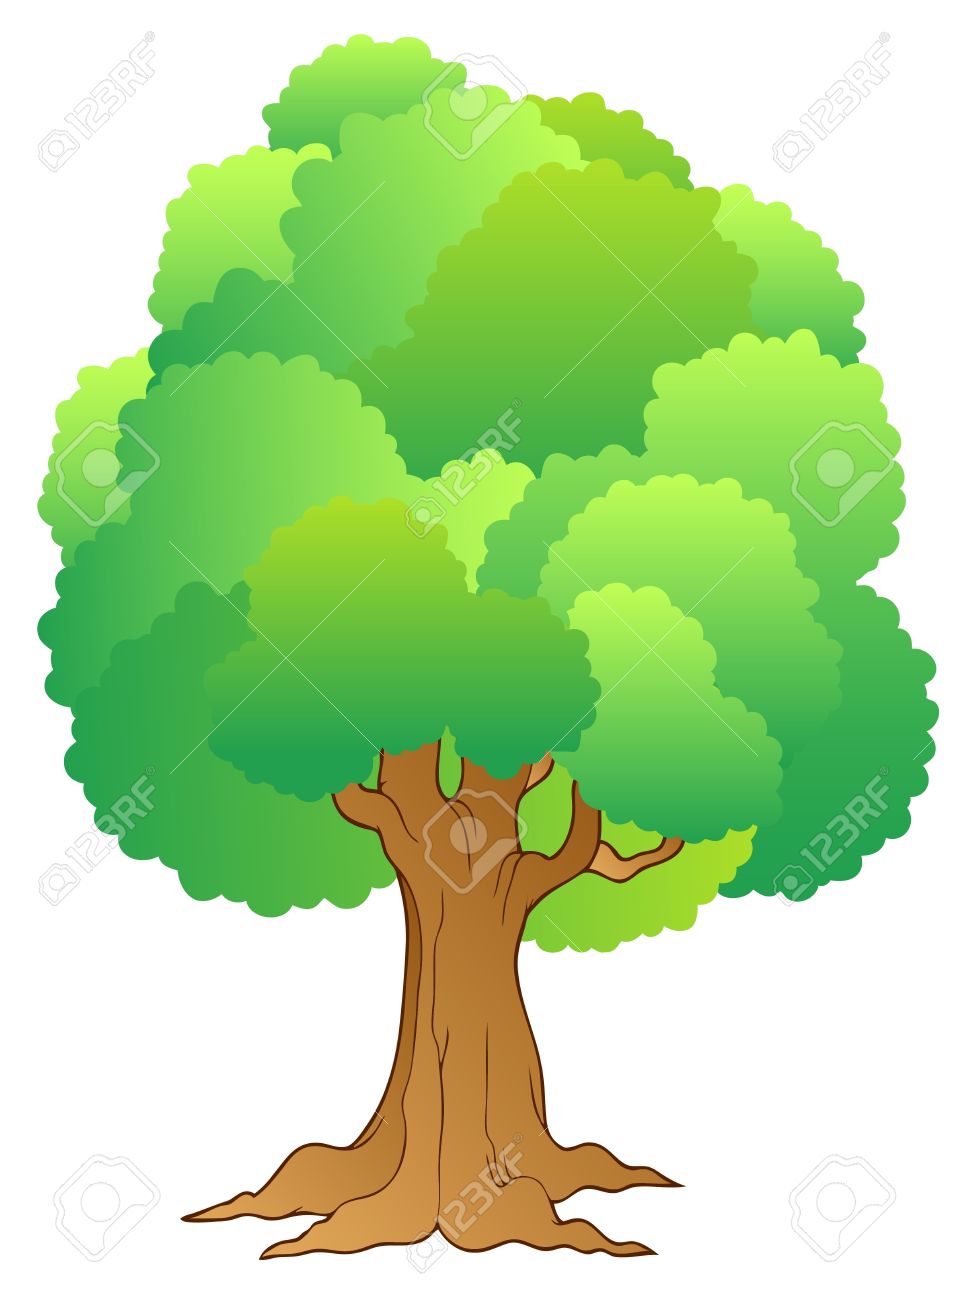 Treetops clipart #5, Download drawings